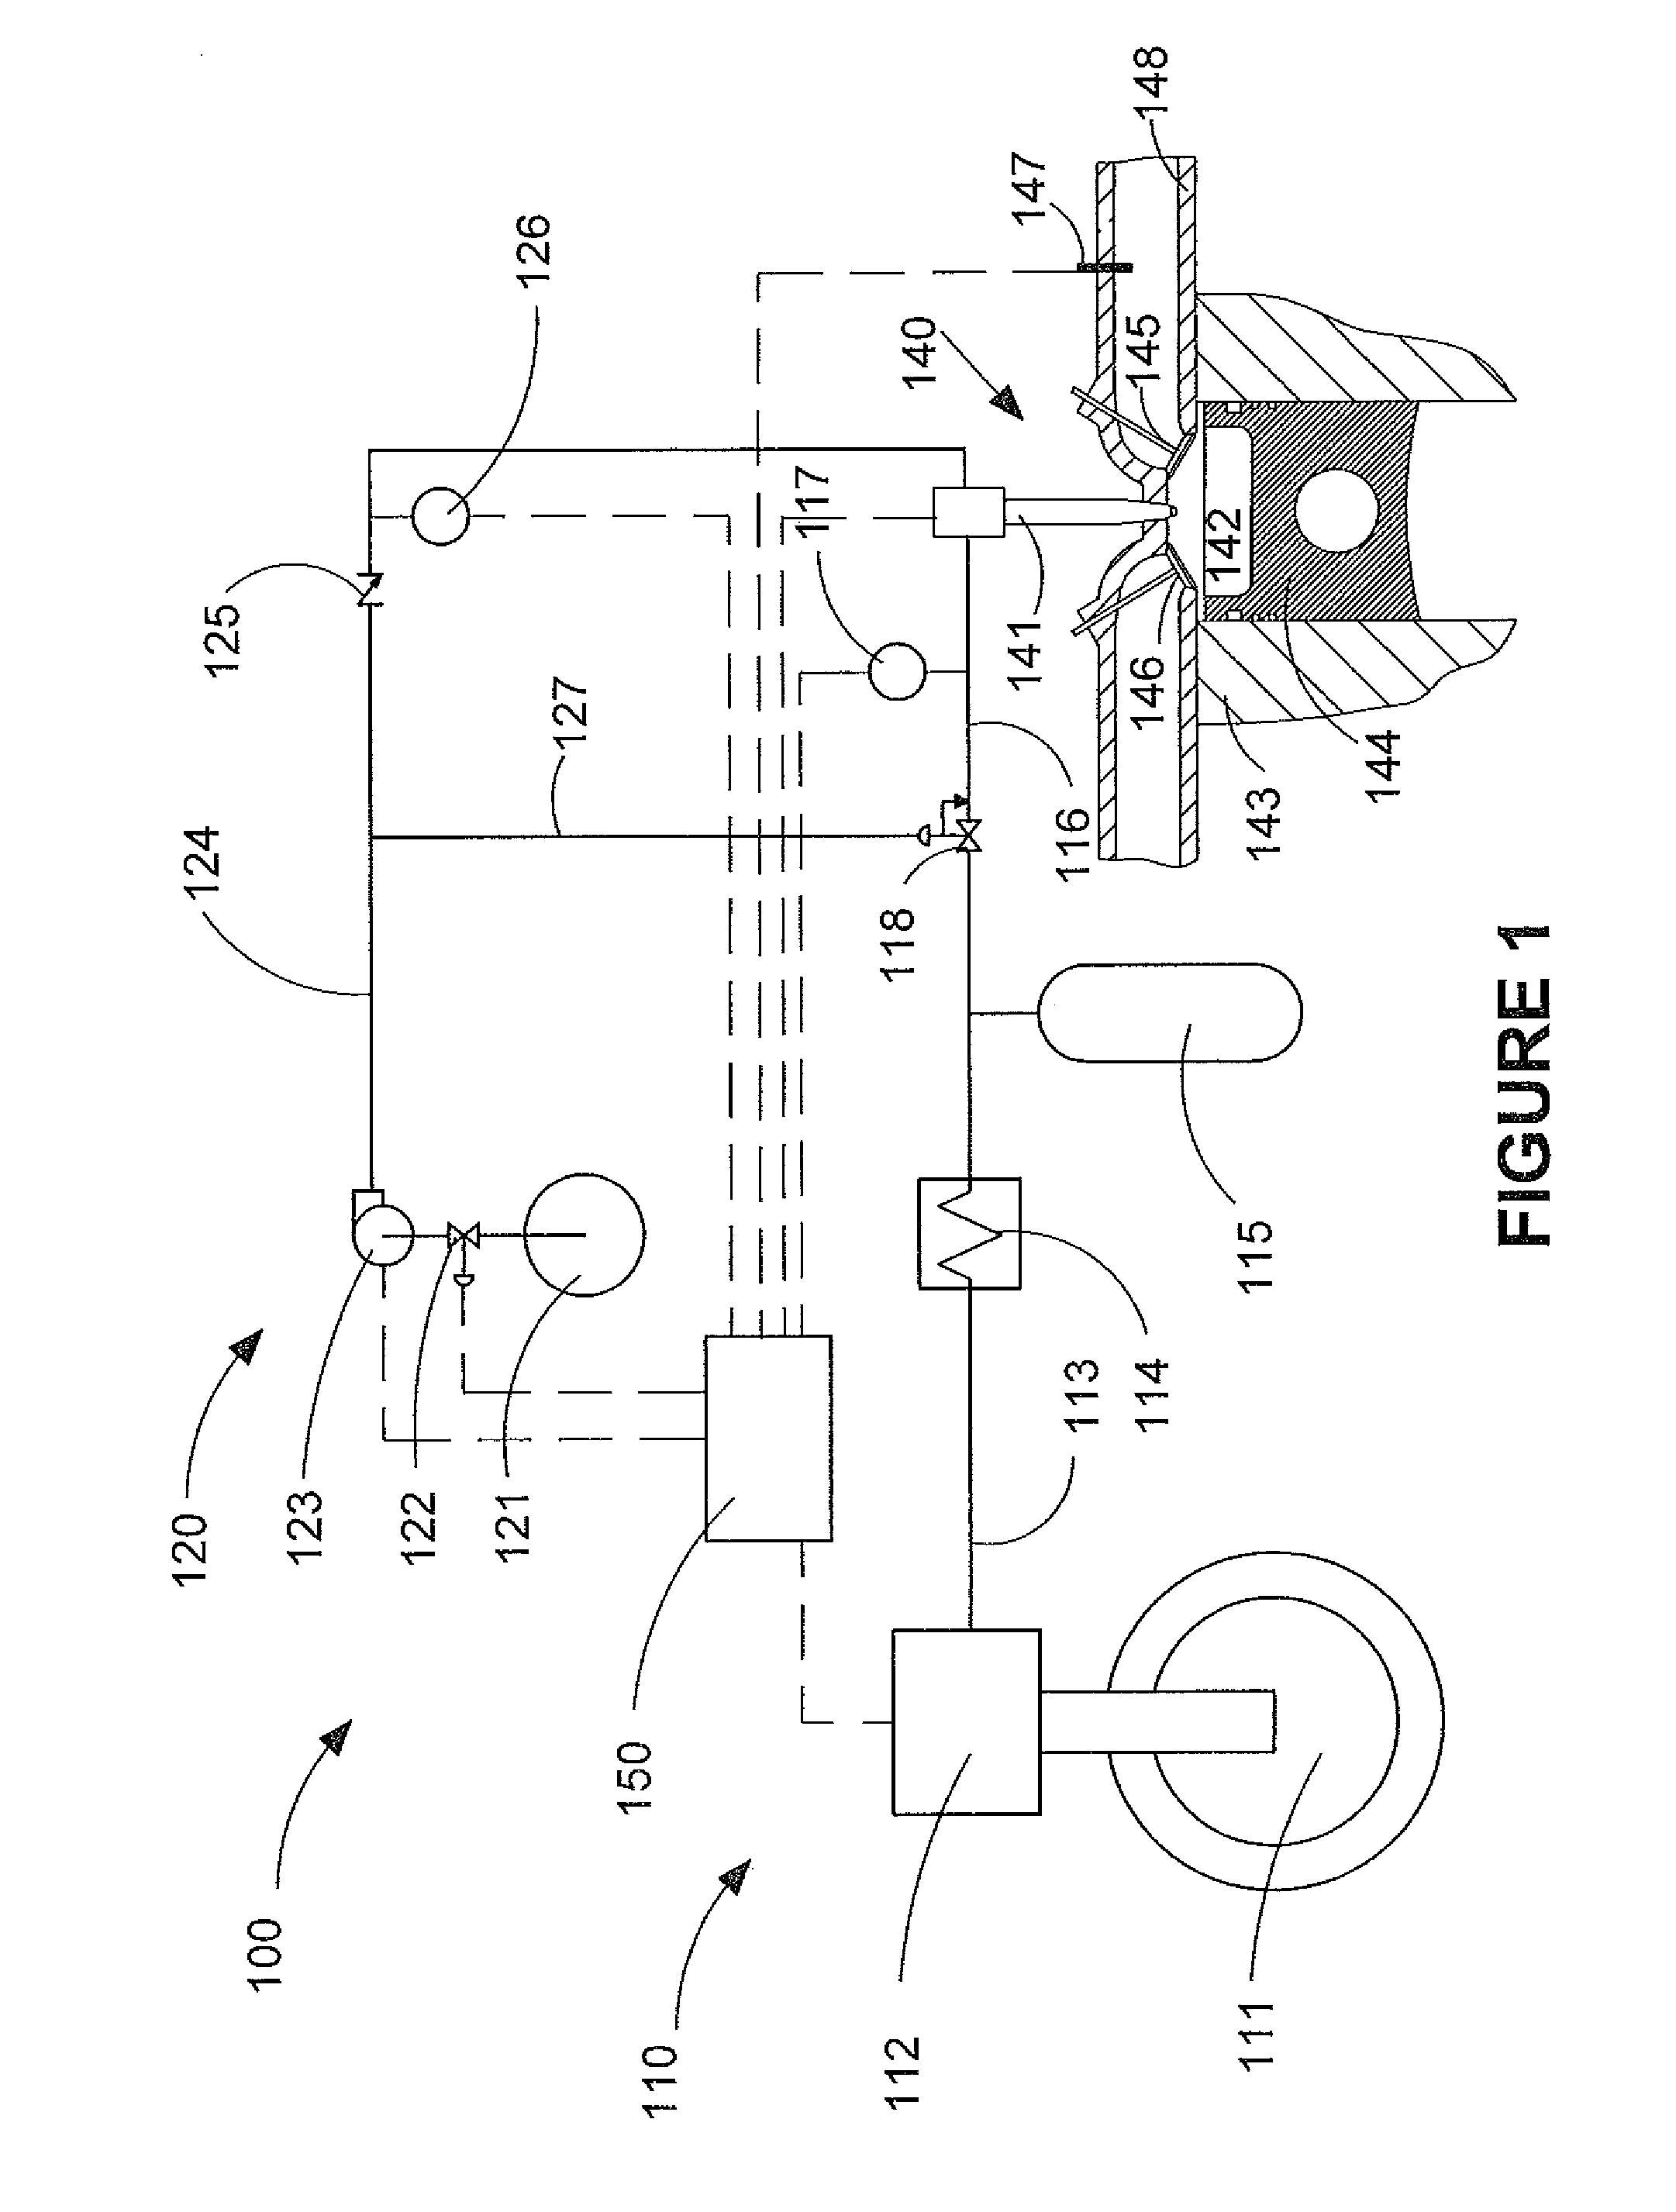 Method for determining fuel injection on-time in a gaseous-fuelled internal combustion engine